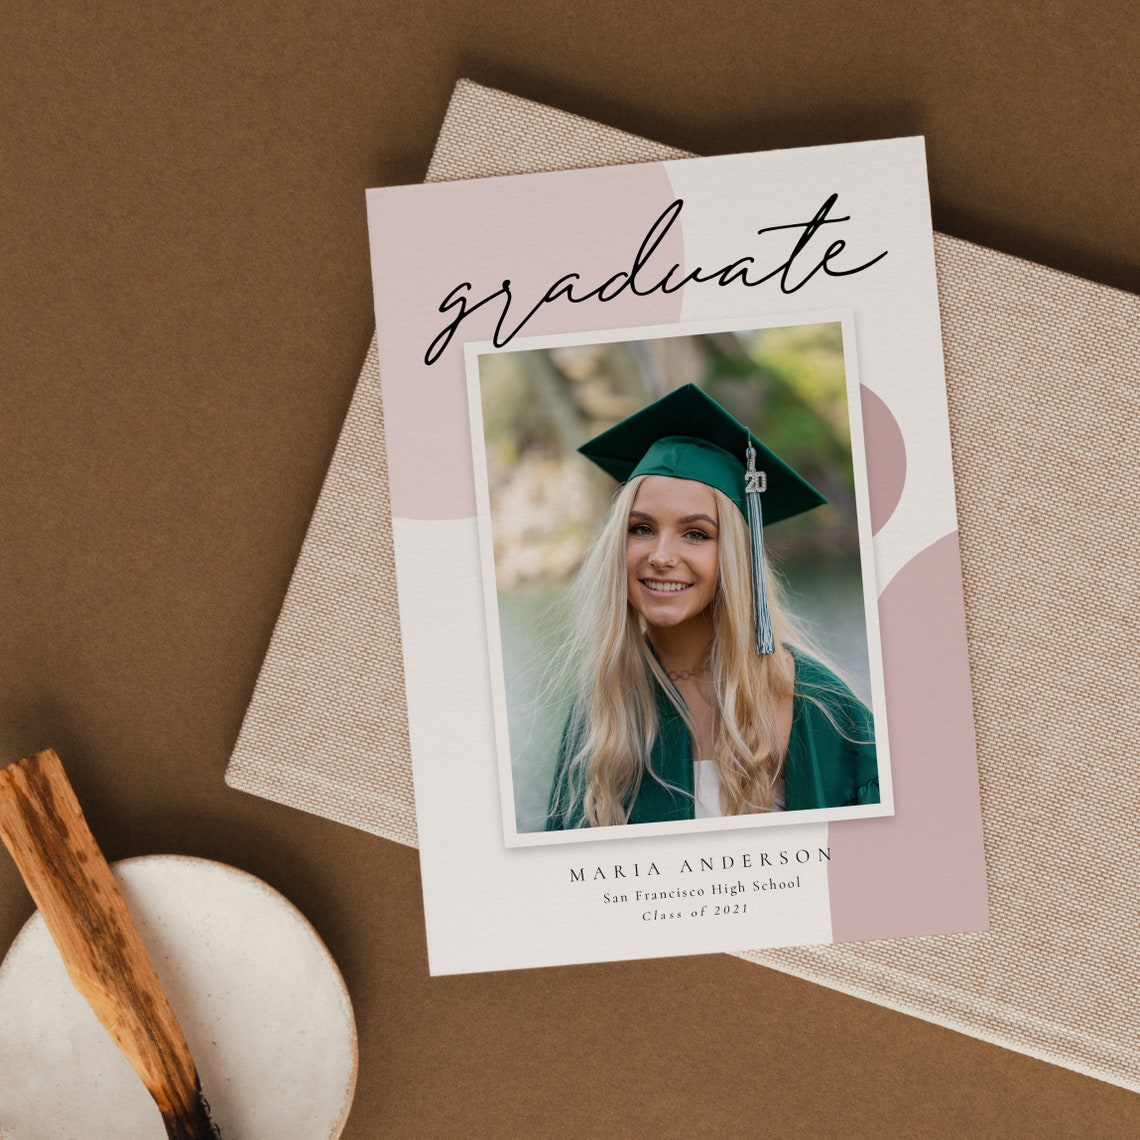 Graduation Announcement Card Canva And Photoshop Template Etsy